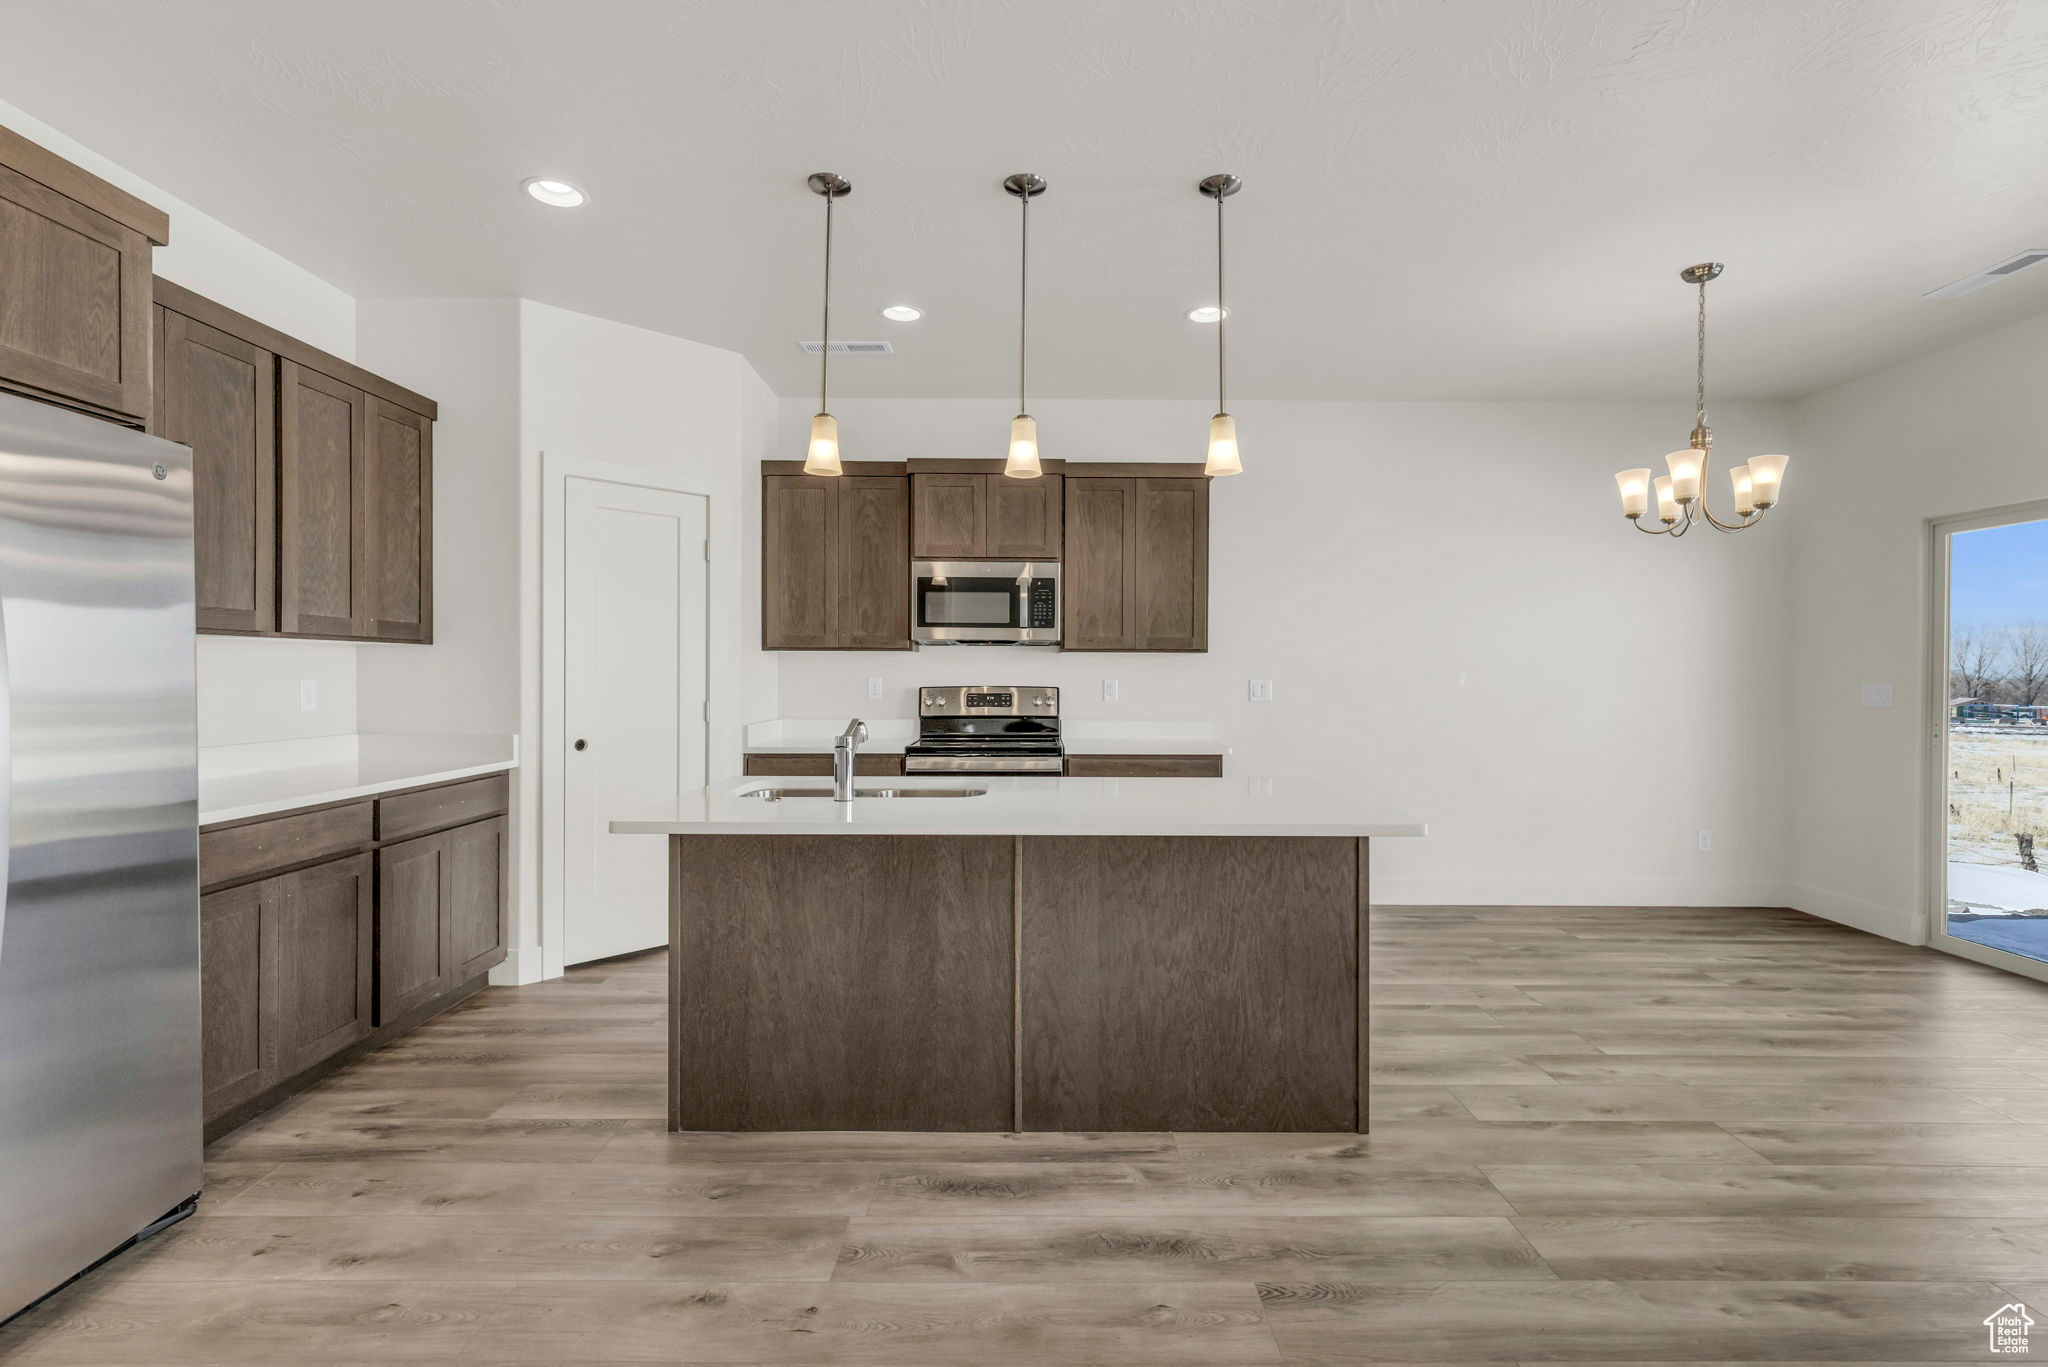 Kitchen featuring light wood-type flooring, dark brown cabinets, stainless steel appliances, pendant lighting, and a chandelier